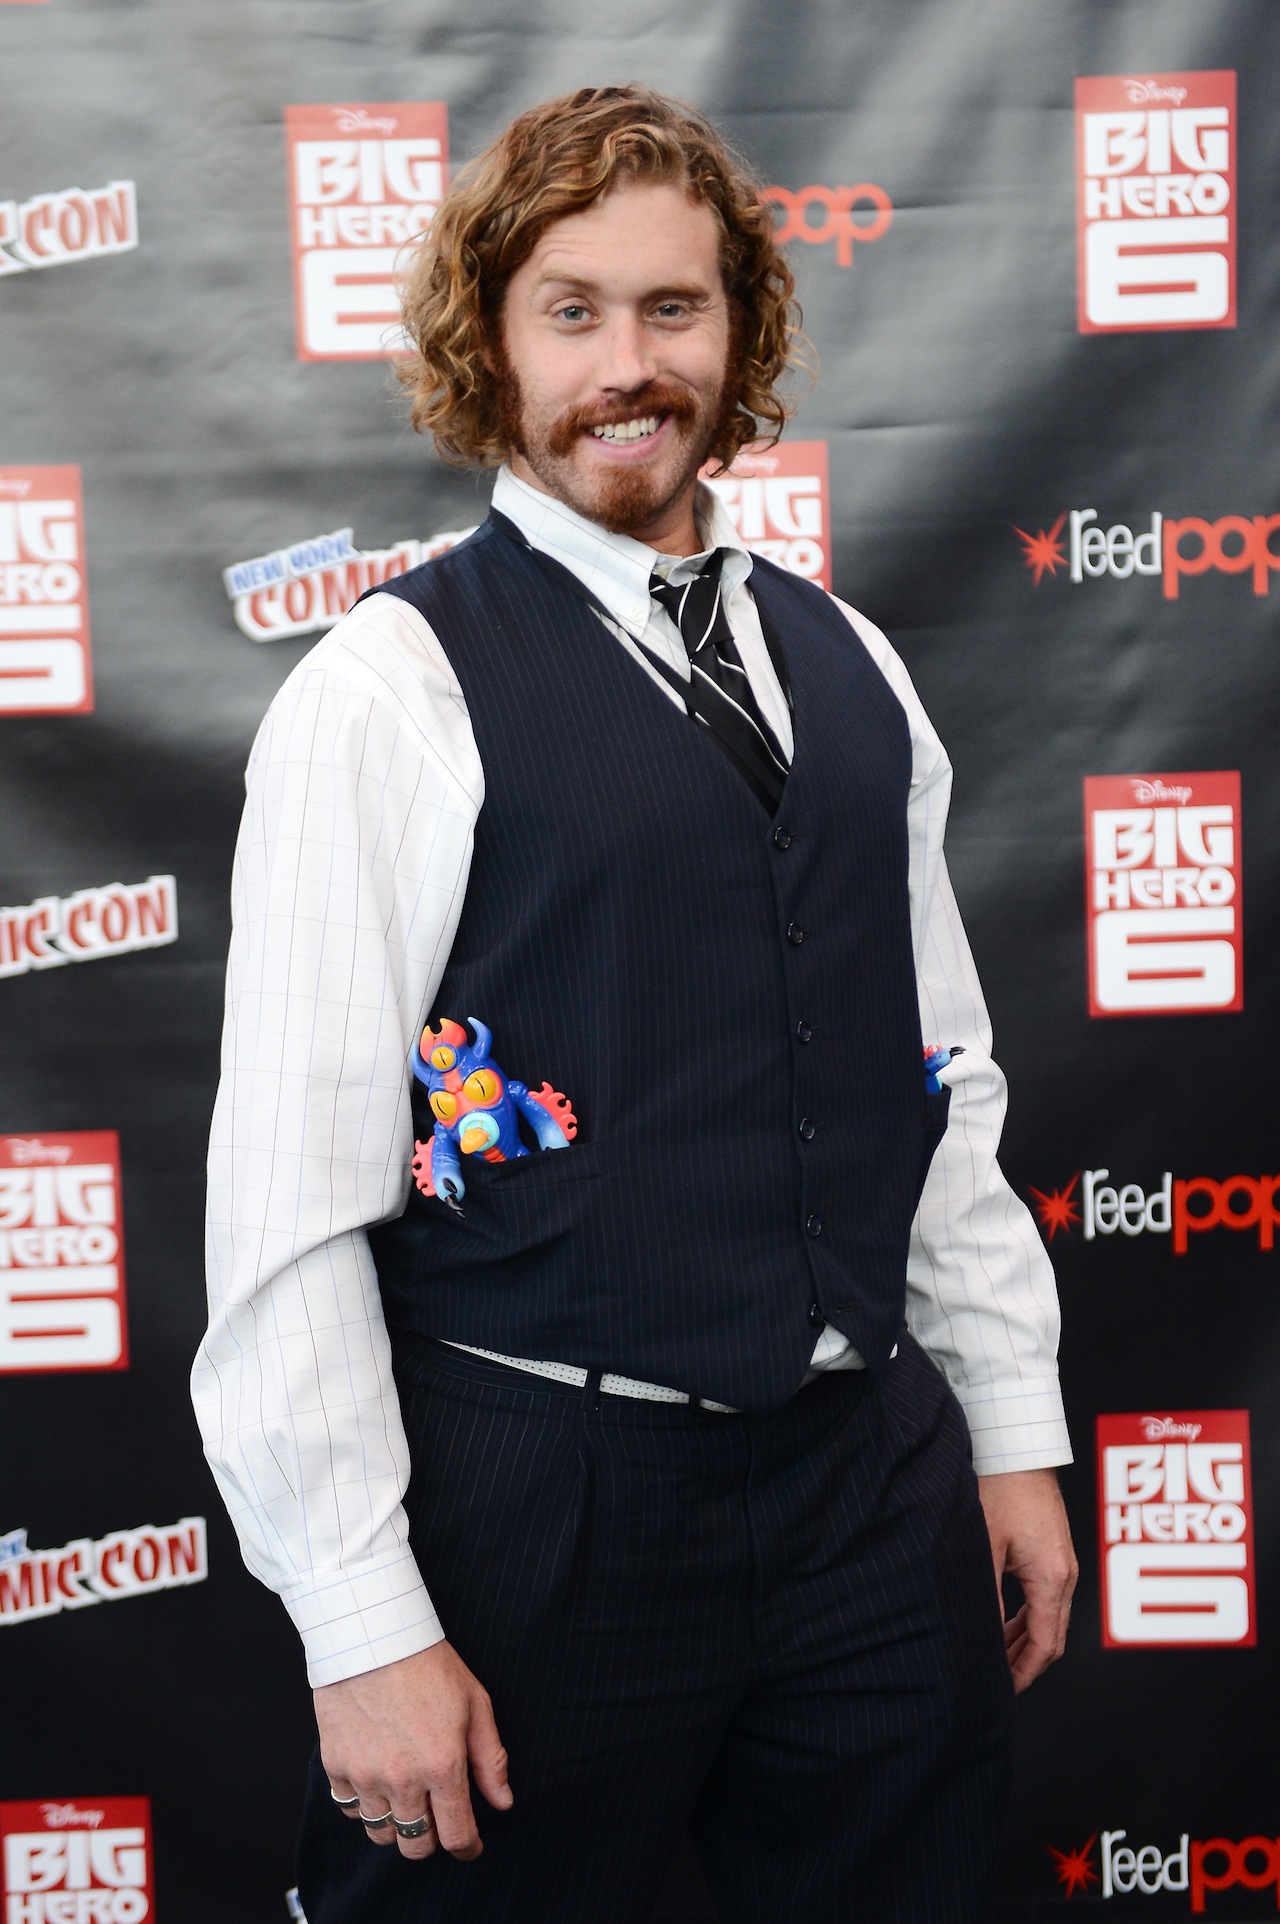 NEW YORK, NY - OCTOBER 09:  Actor T.J. Miller attends Walt Disney Studios' 2014 New York Comic Con presentations of "Big Hero 6" and "Tomorrowland" at the Javits Convention Center on Thursday October 9, 2014 in New York City.  (Photo by Stephen Lovekin/Getty Images for Disney) *** Local Caption *** TJ Miller